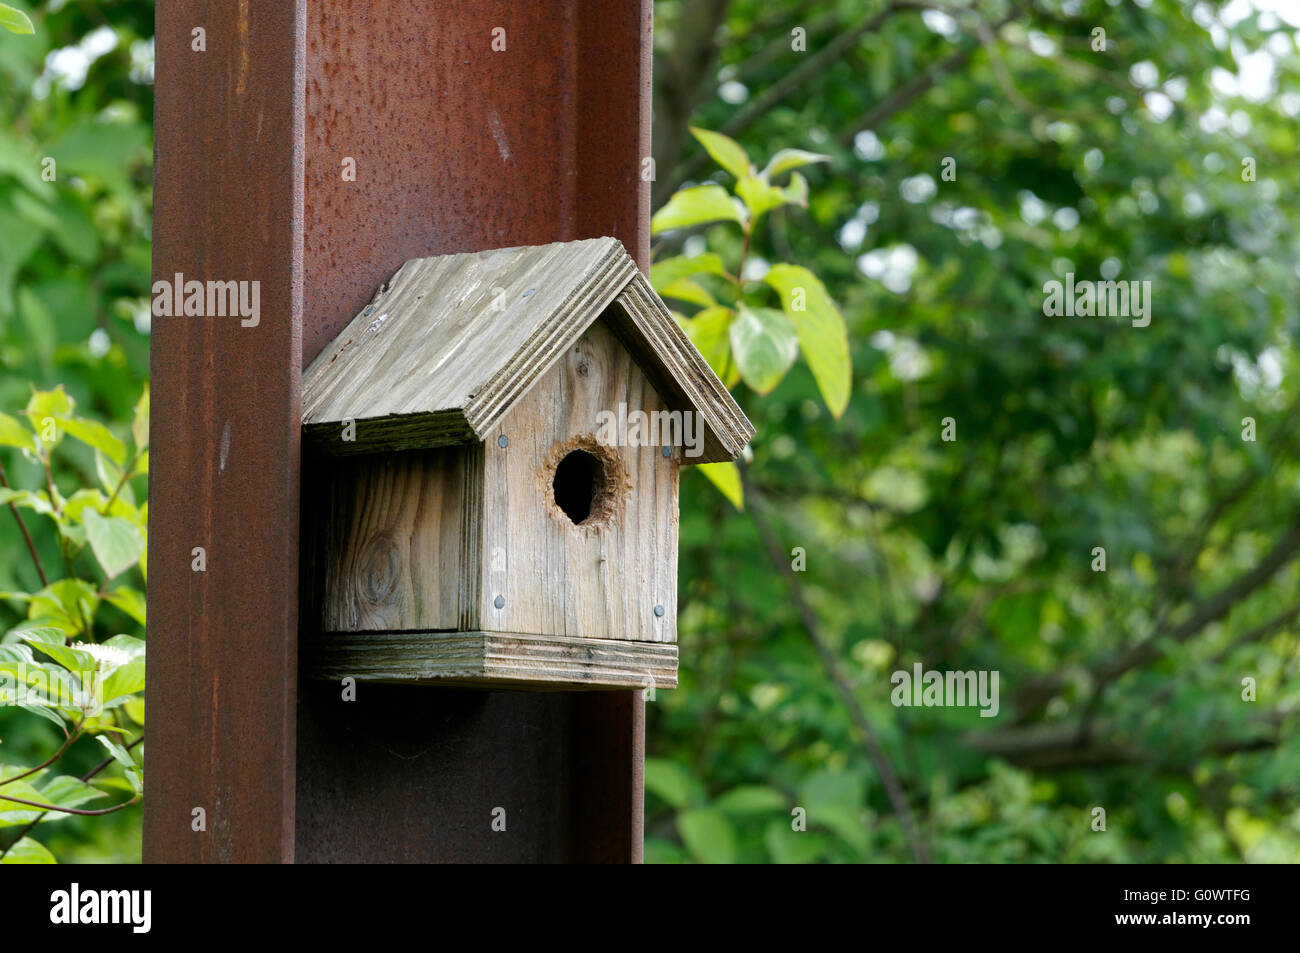 Unpainted wooden birdhouse mounted on an iron girder with greenery in background Stock Photo